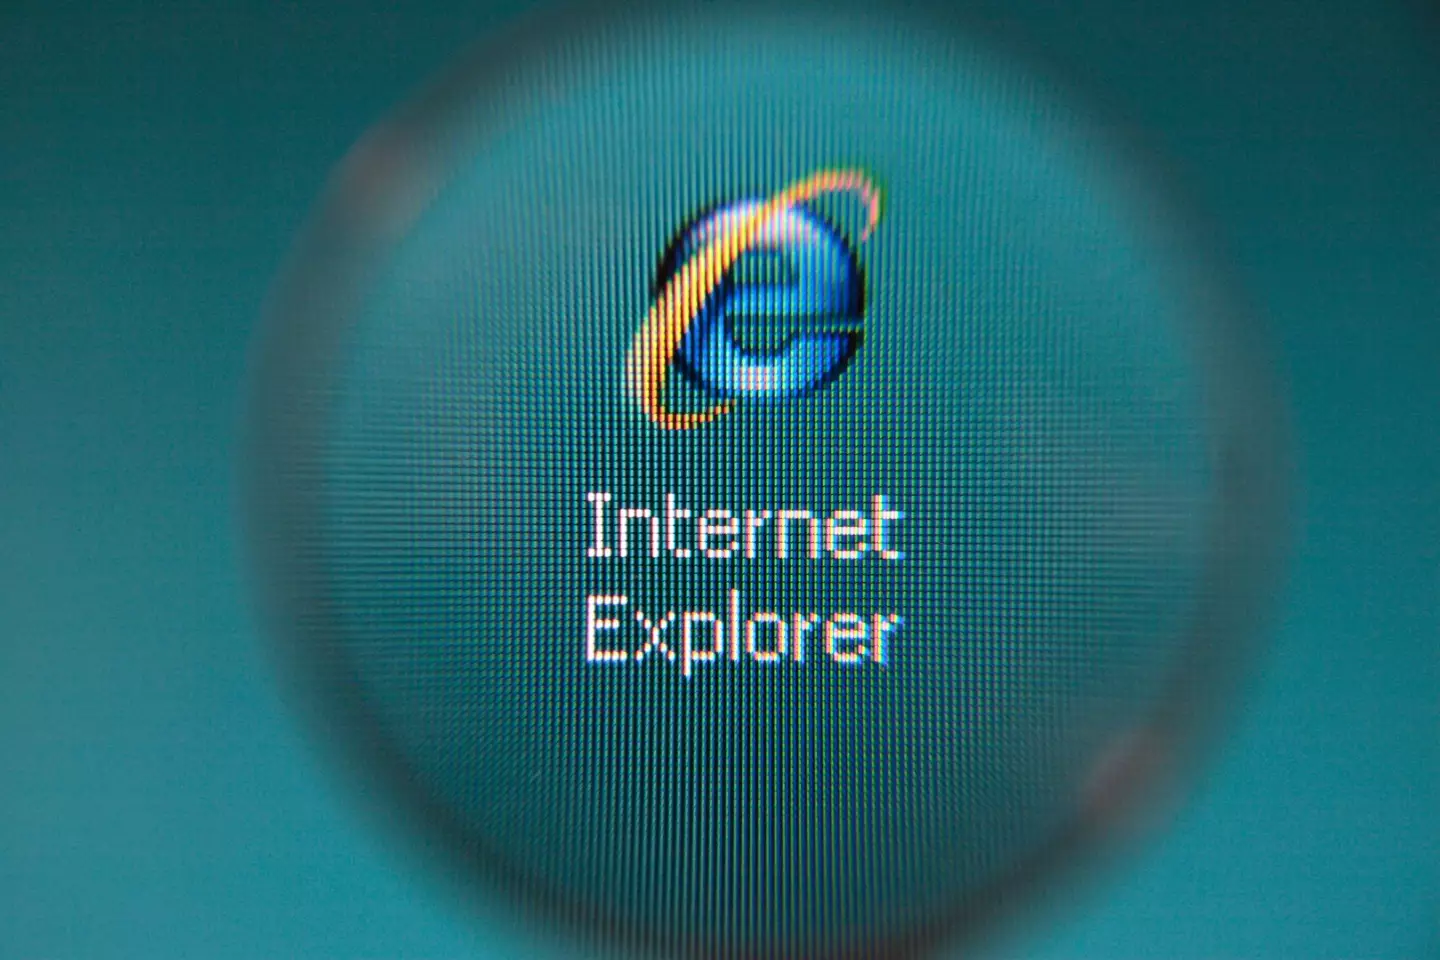 The desktop application for Internet Explorer is being permanently disabled today (14 February).